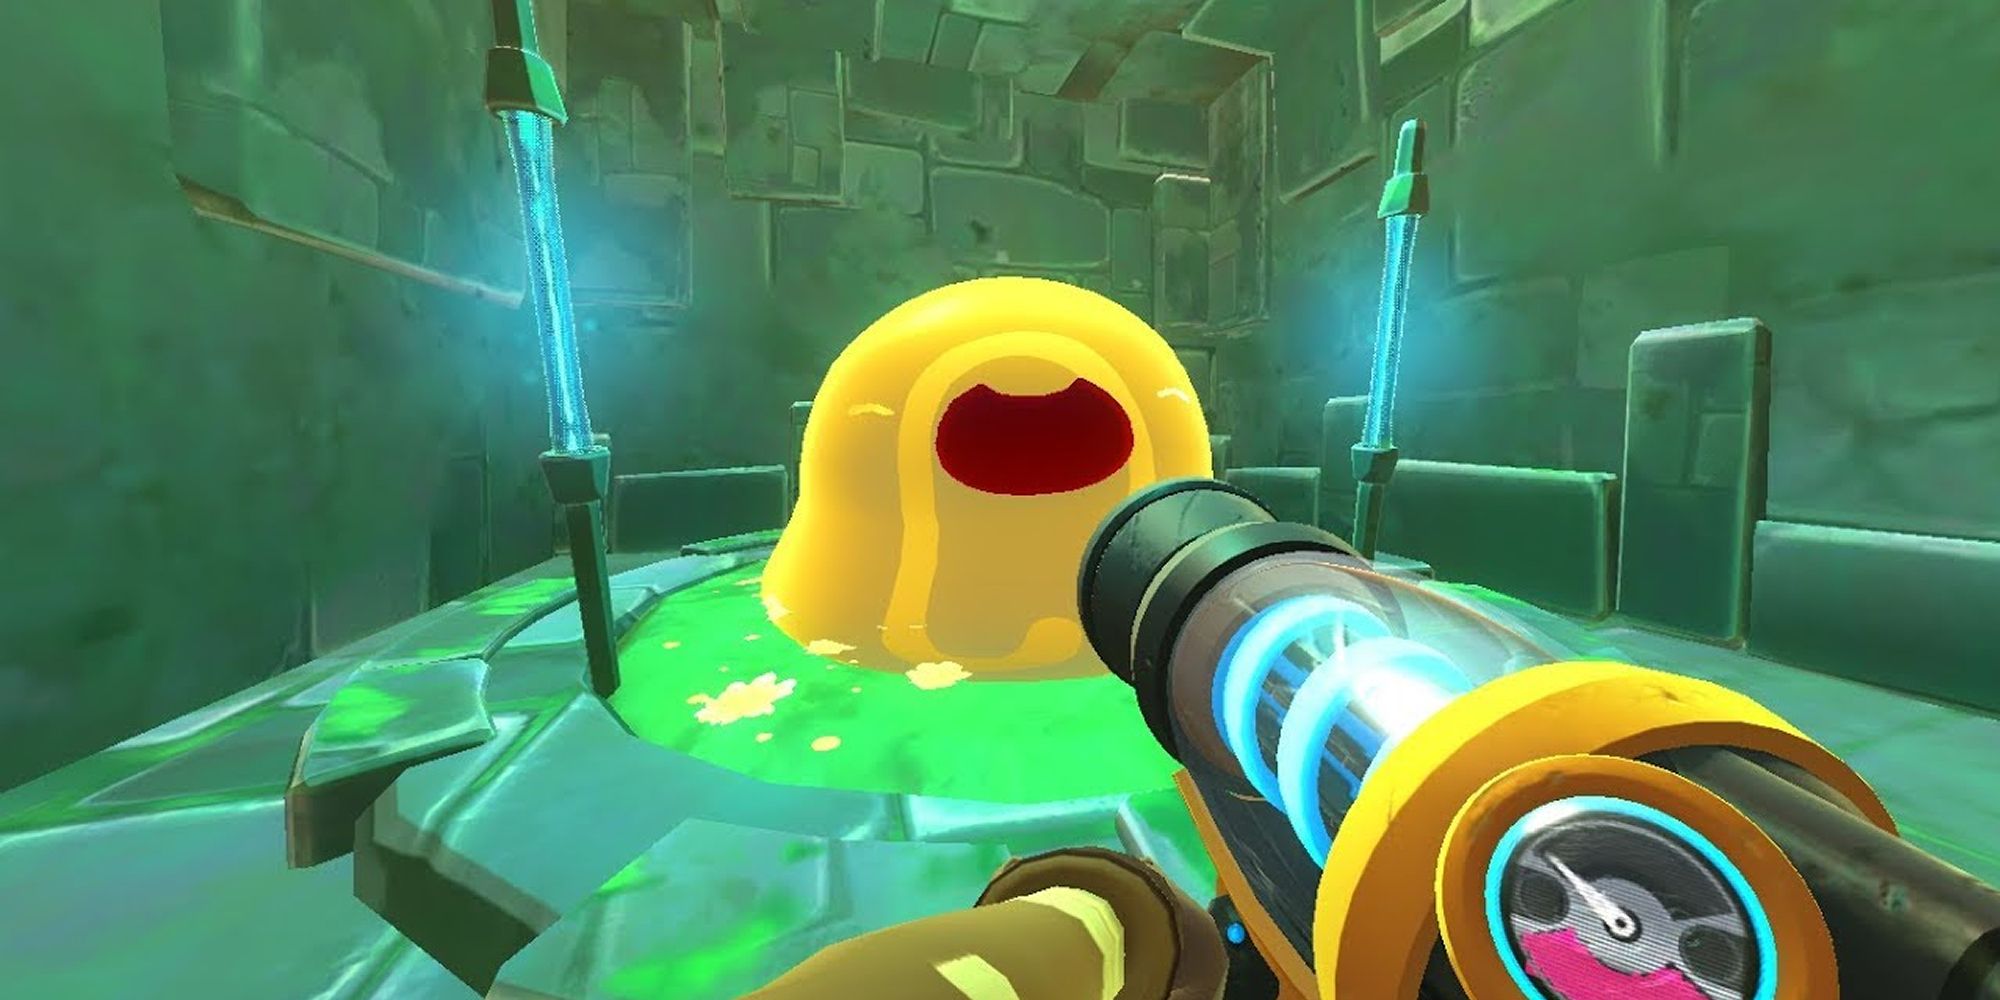 A Large Yellow Slime